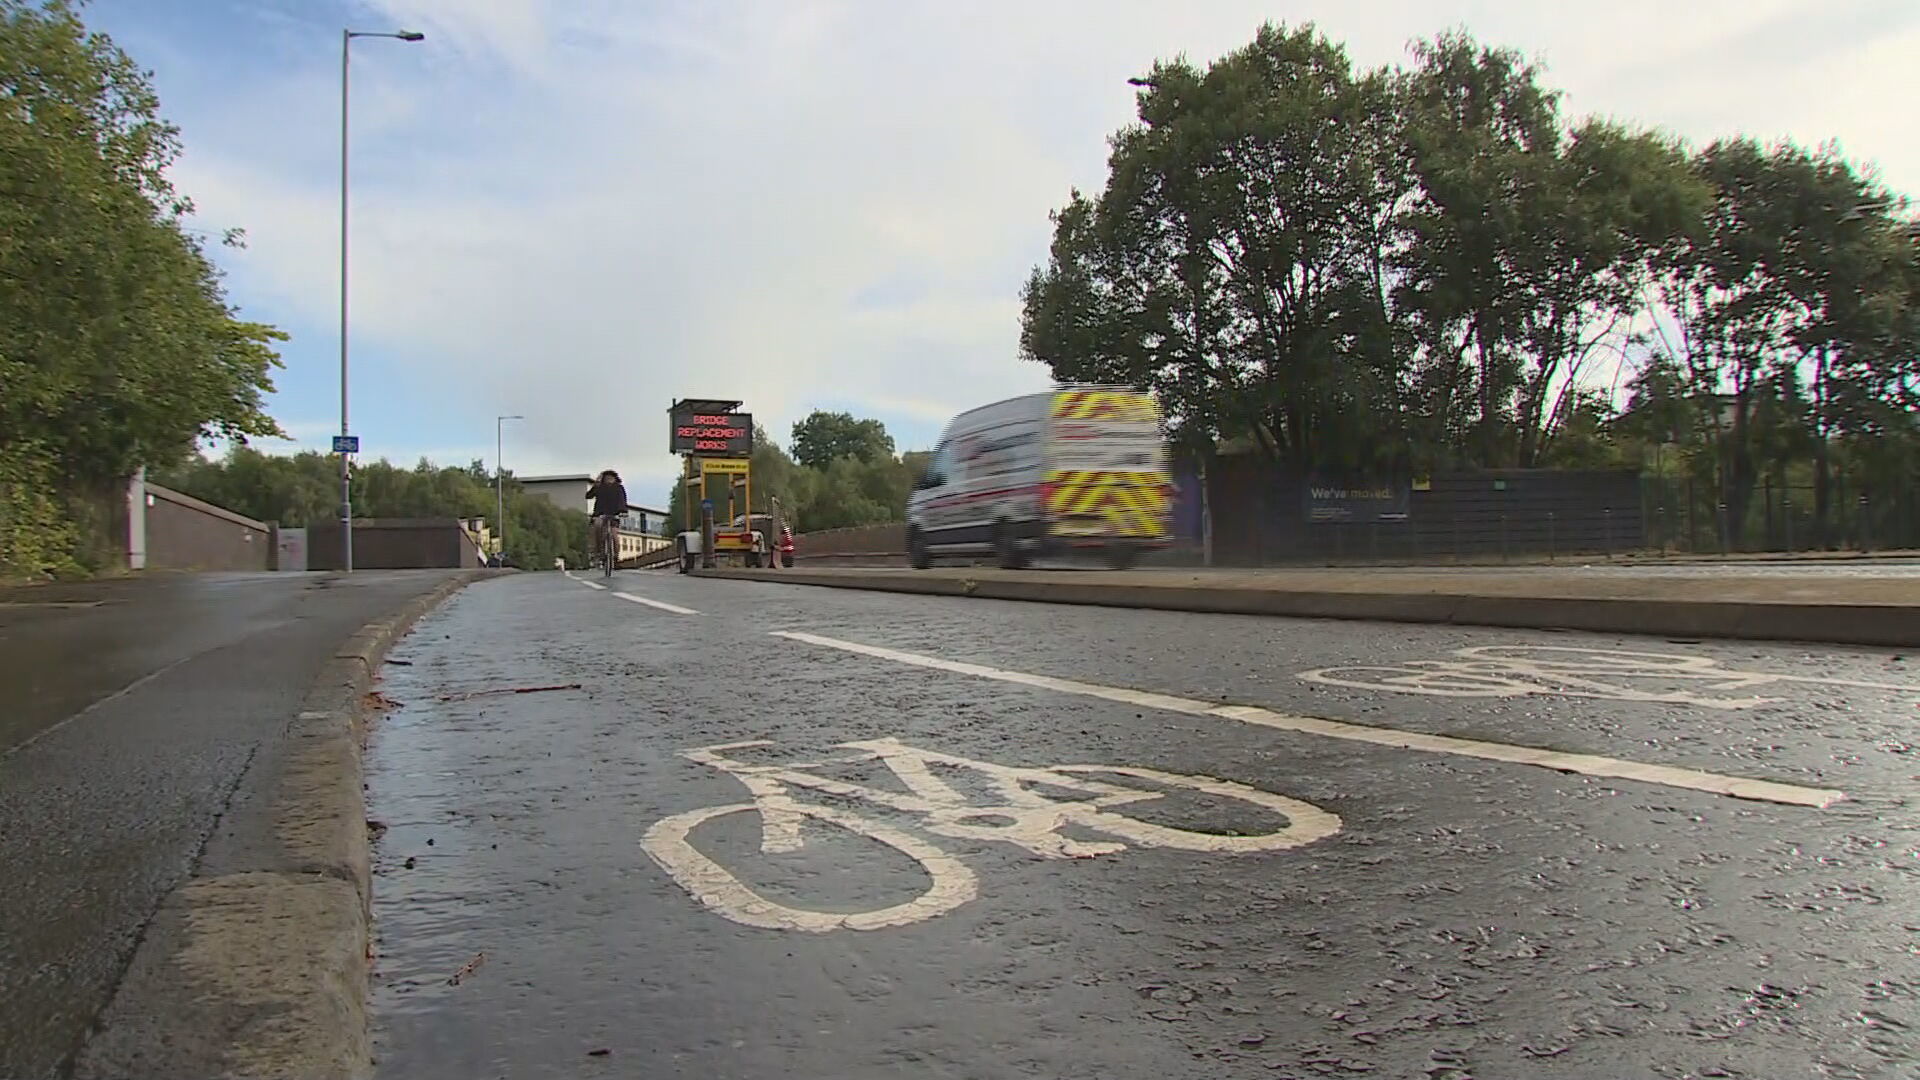 Commuters forced to take lengthy detours due to Shields Road closure